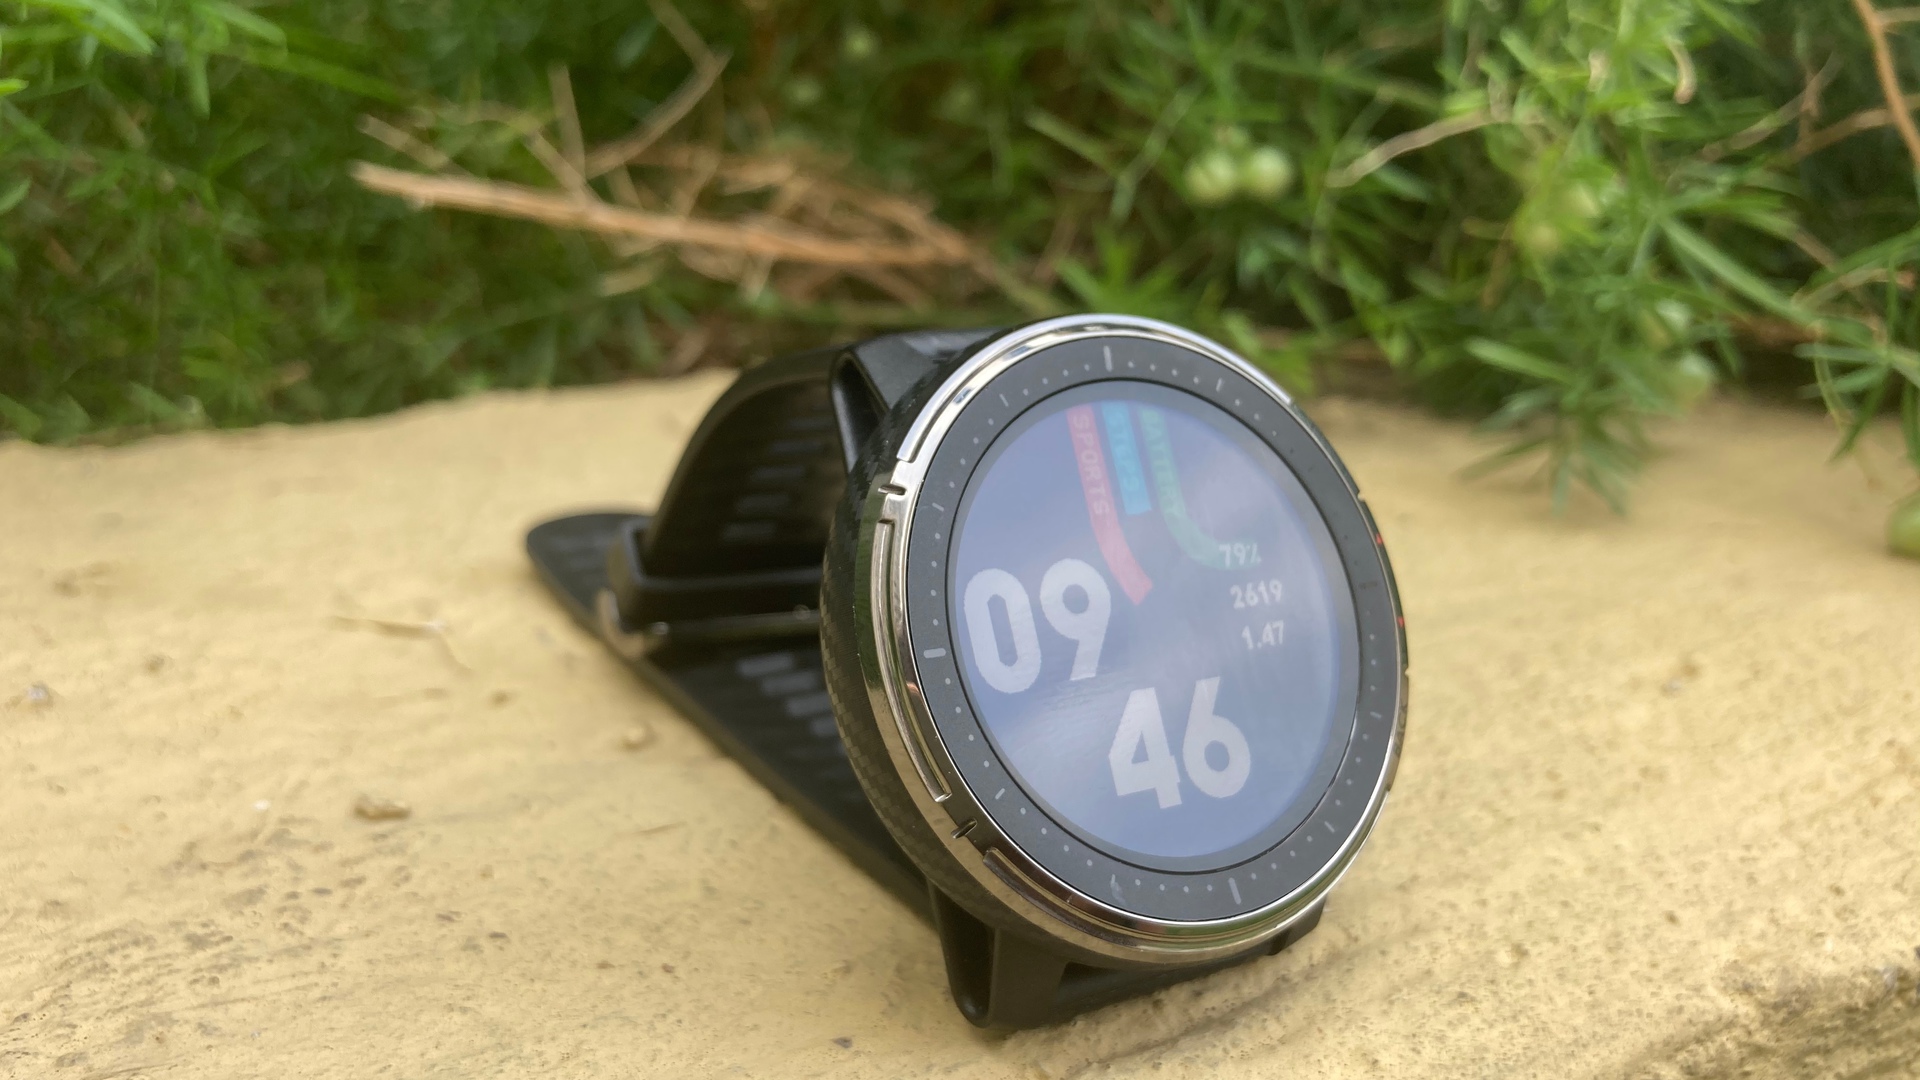 The Amazfit Stratos 3 kept on a ledge in a folded state showing its display